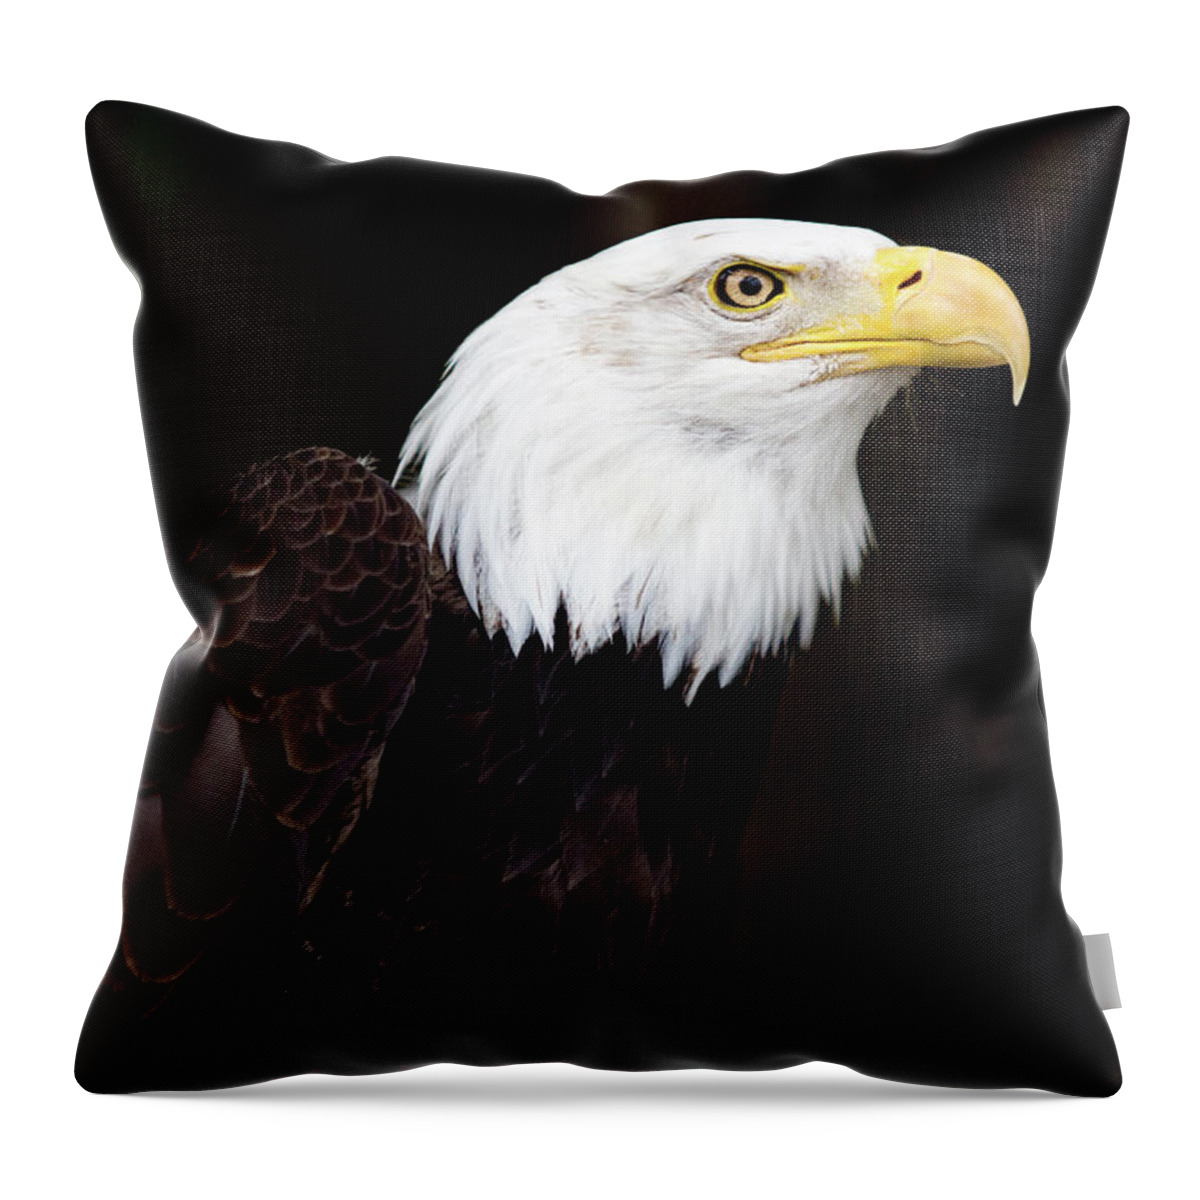 The Animal Throw Pillow featuring the digital art Bald Eagle - PNW by Birdly Canada